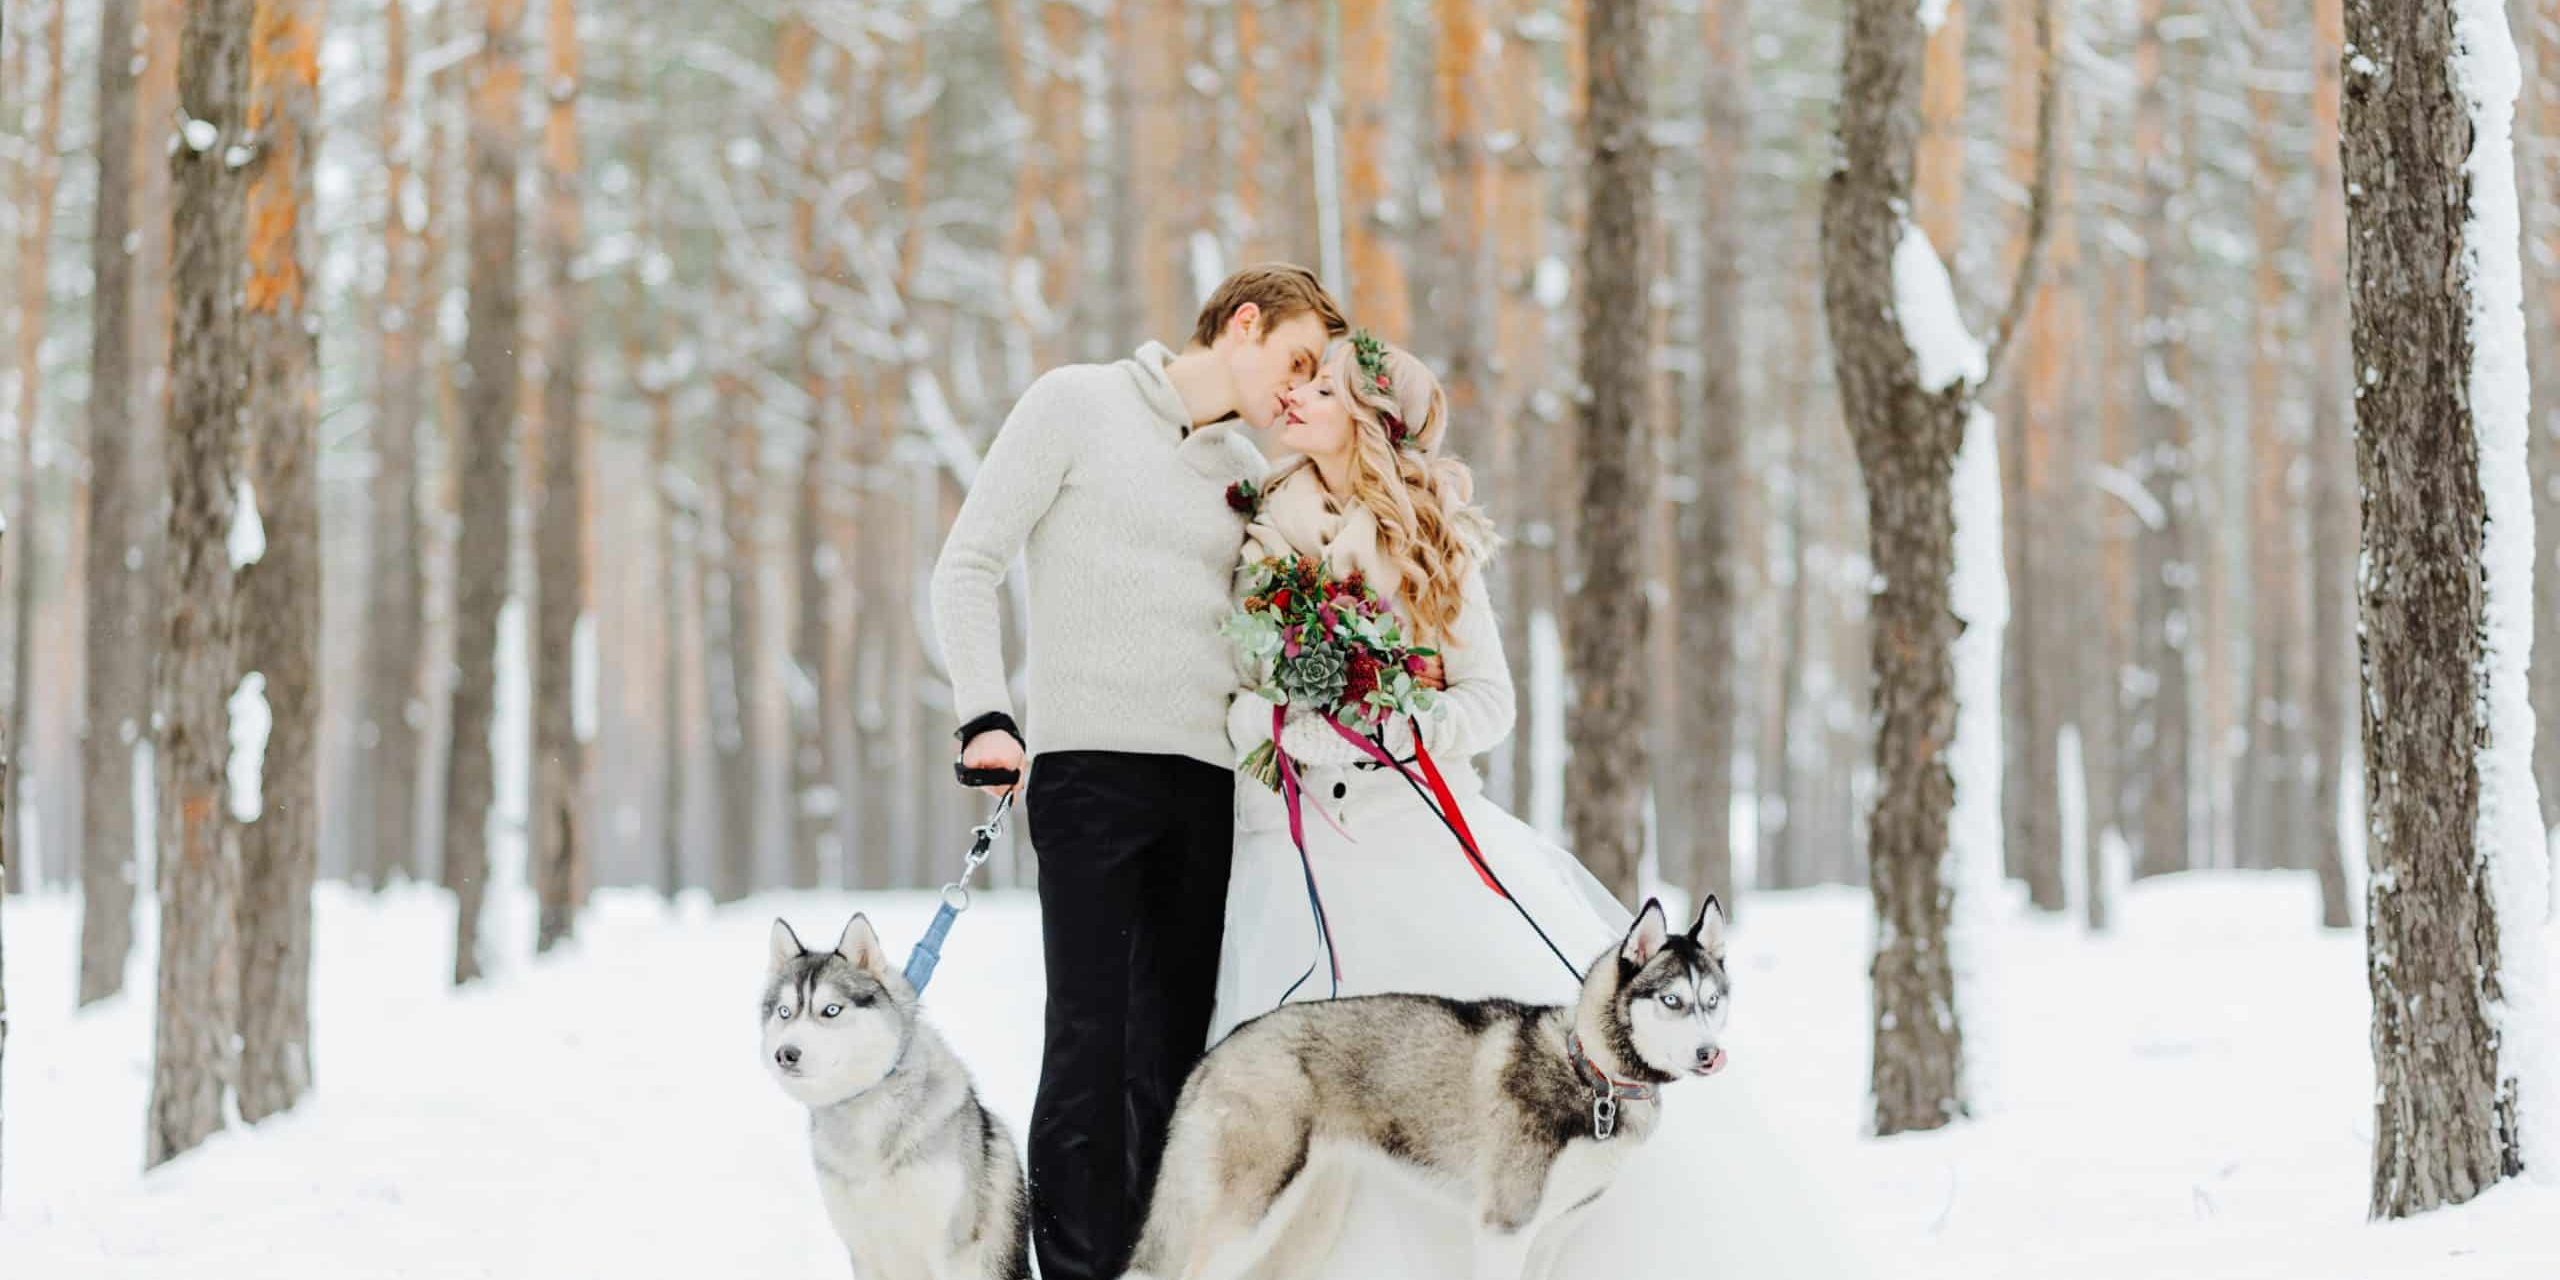 Winter wedding photosession in nature with dogs